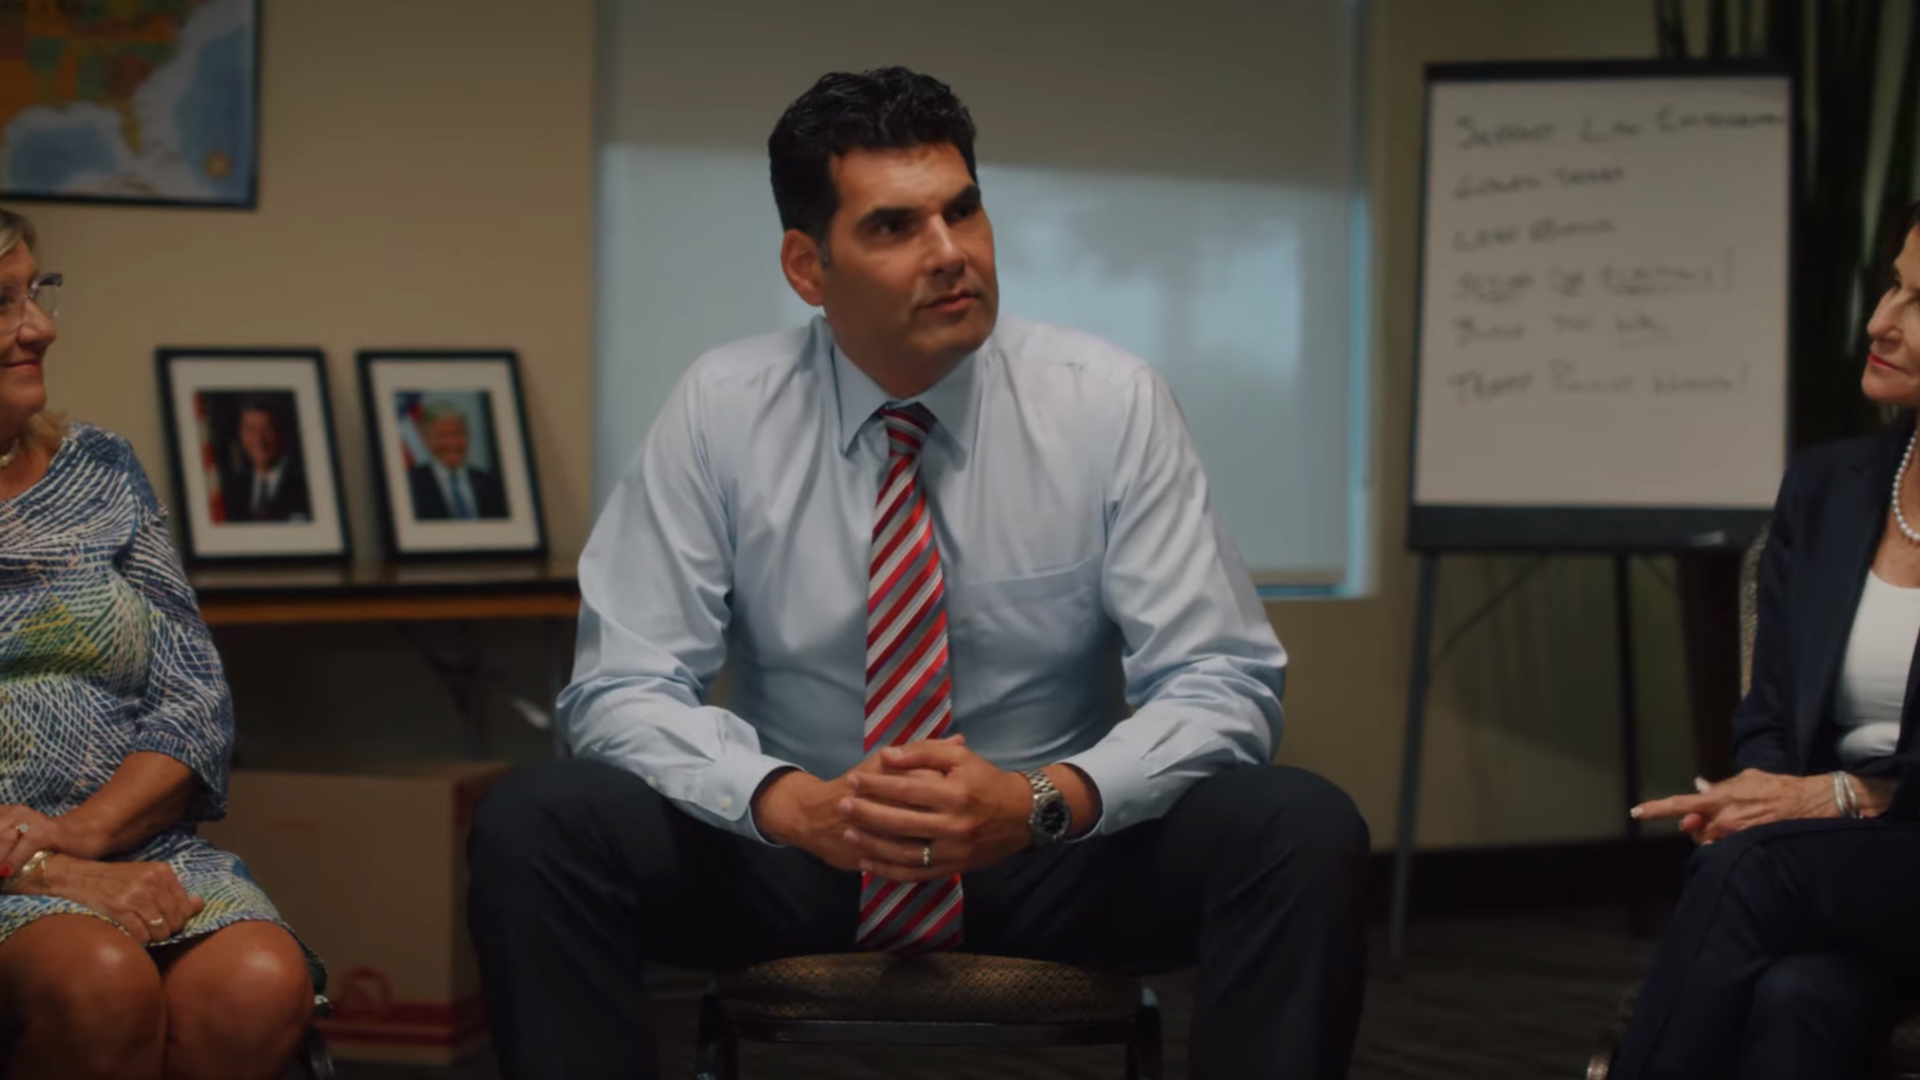 Rodney Glassman in a campaign video announcing his entrance into the Republican primary for Arizona Attorney General. Sept. 30, 2021